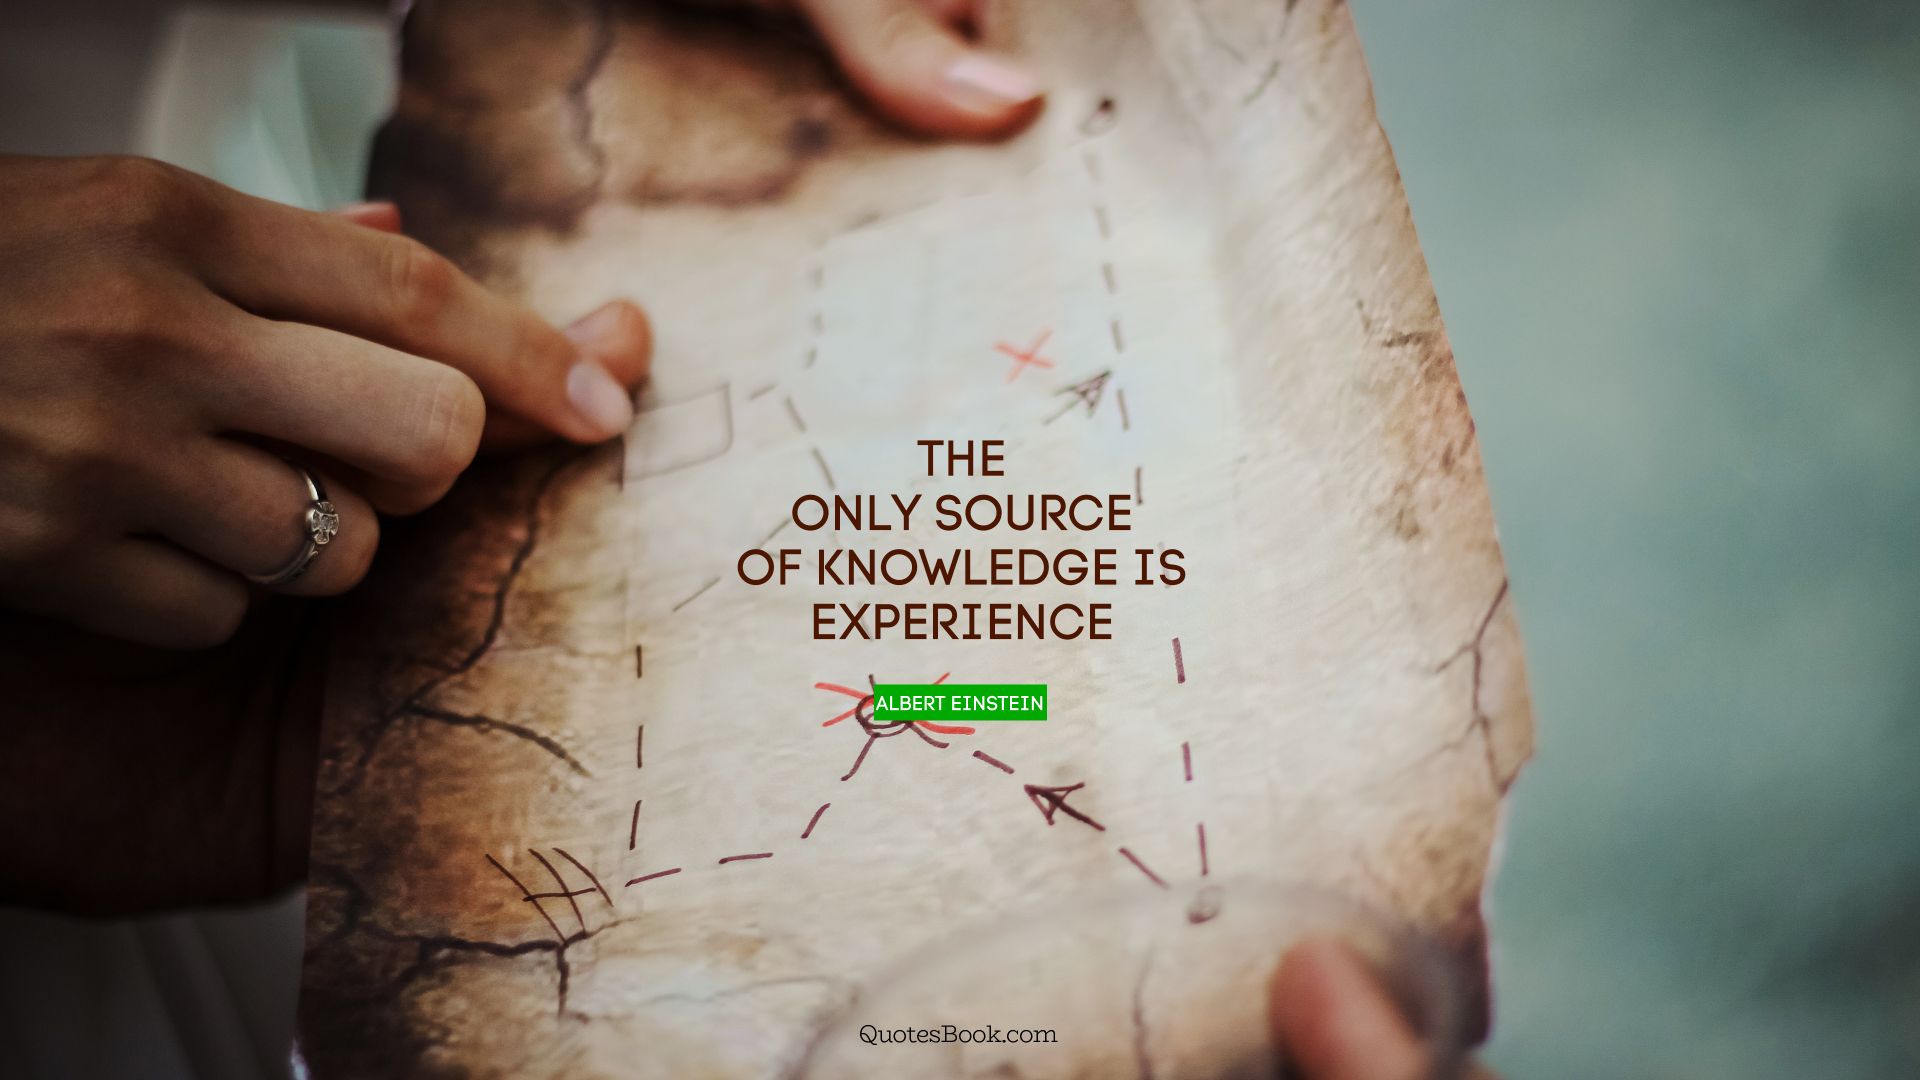 The only source of knowledge is experience. - Quote by Albert Einstein